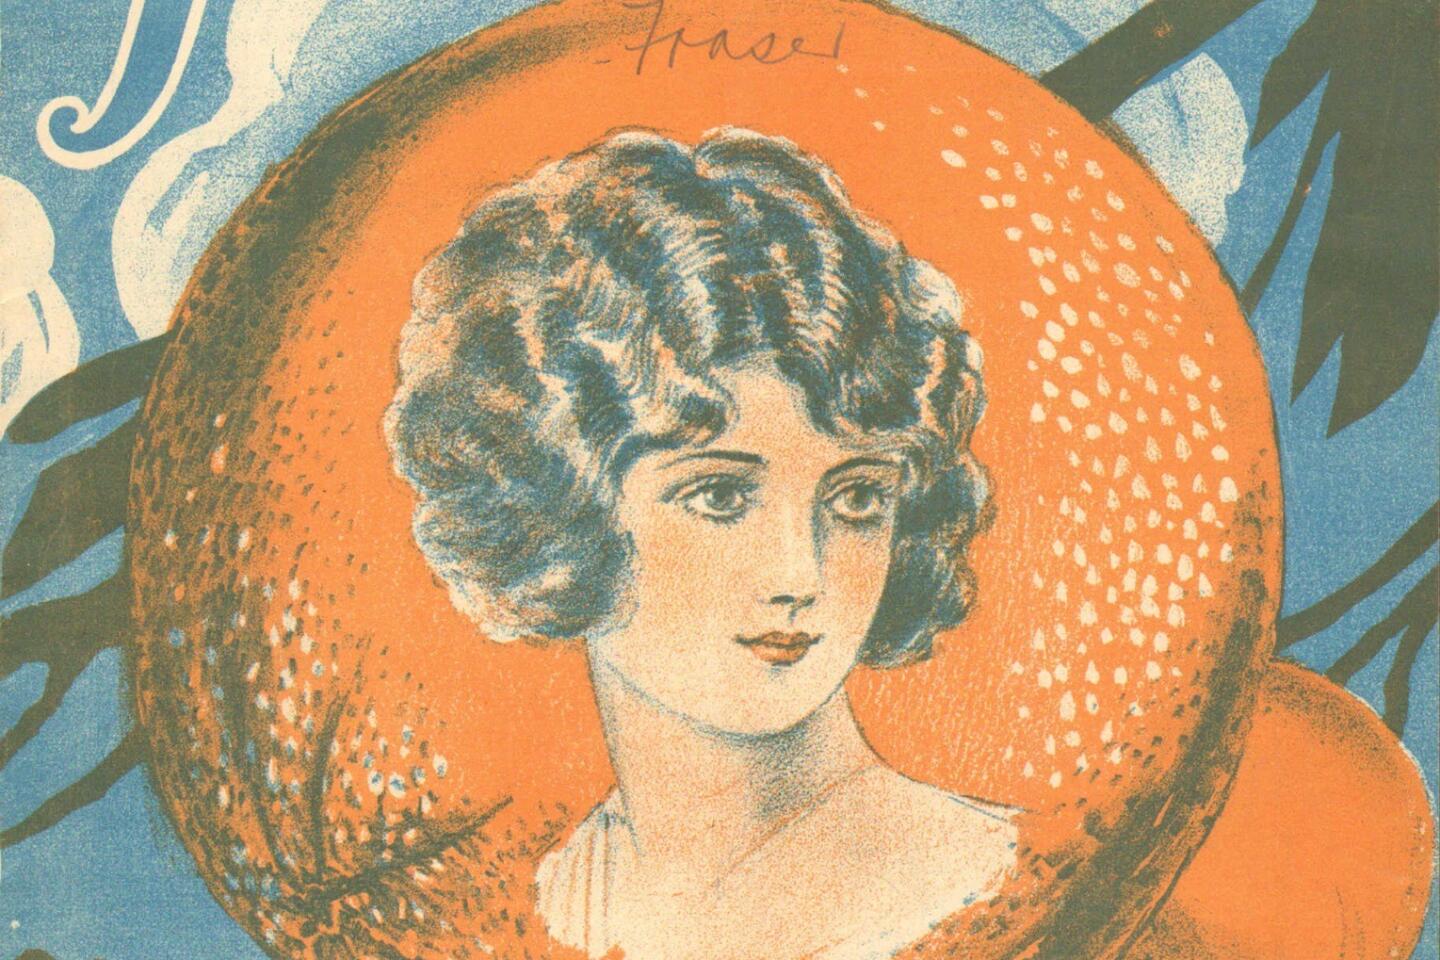 The cover for the 1923 sheet music "Home in Pasadena," written by Grant Clarke and Edgar Leslie and composed by Harry Warren. The sheet music is part of the 2013 book, "Songs in the Key of Los Angeles: Sheet Music From the Collection of the Los Angeles Public Library."